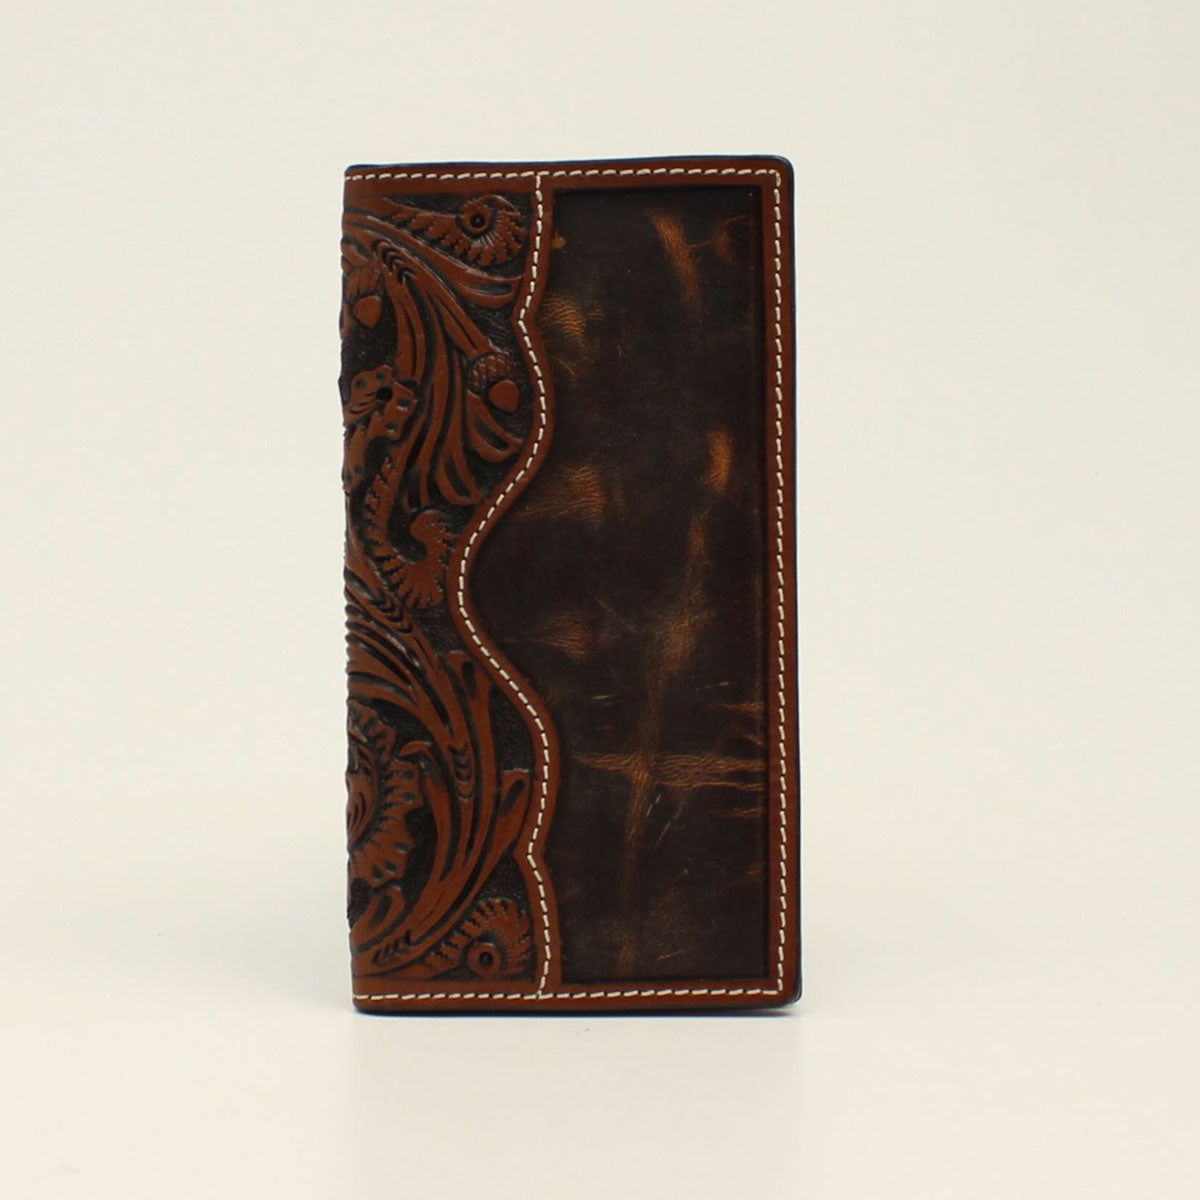 3D Rodeo Wallet Floral Acron Tooled Brown